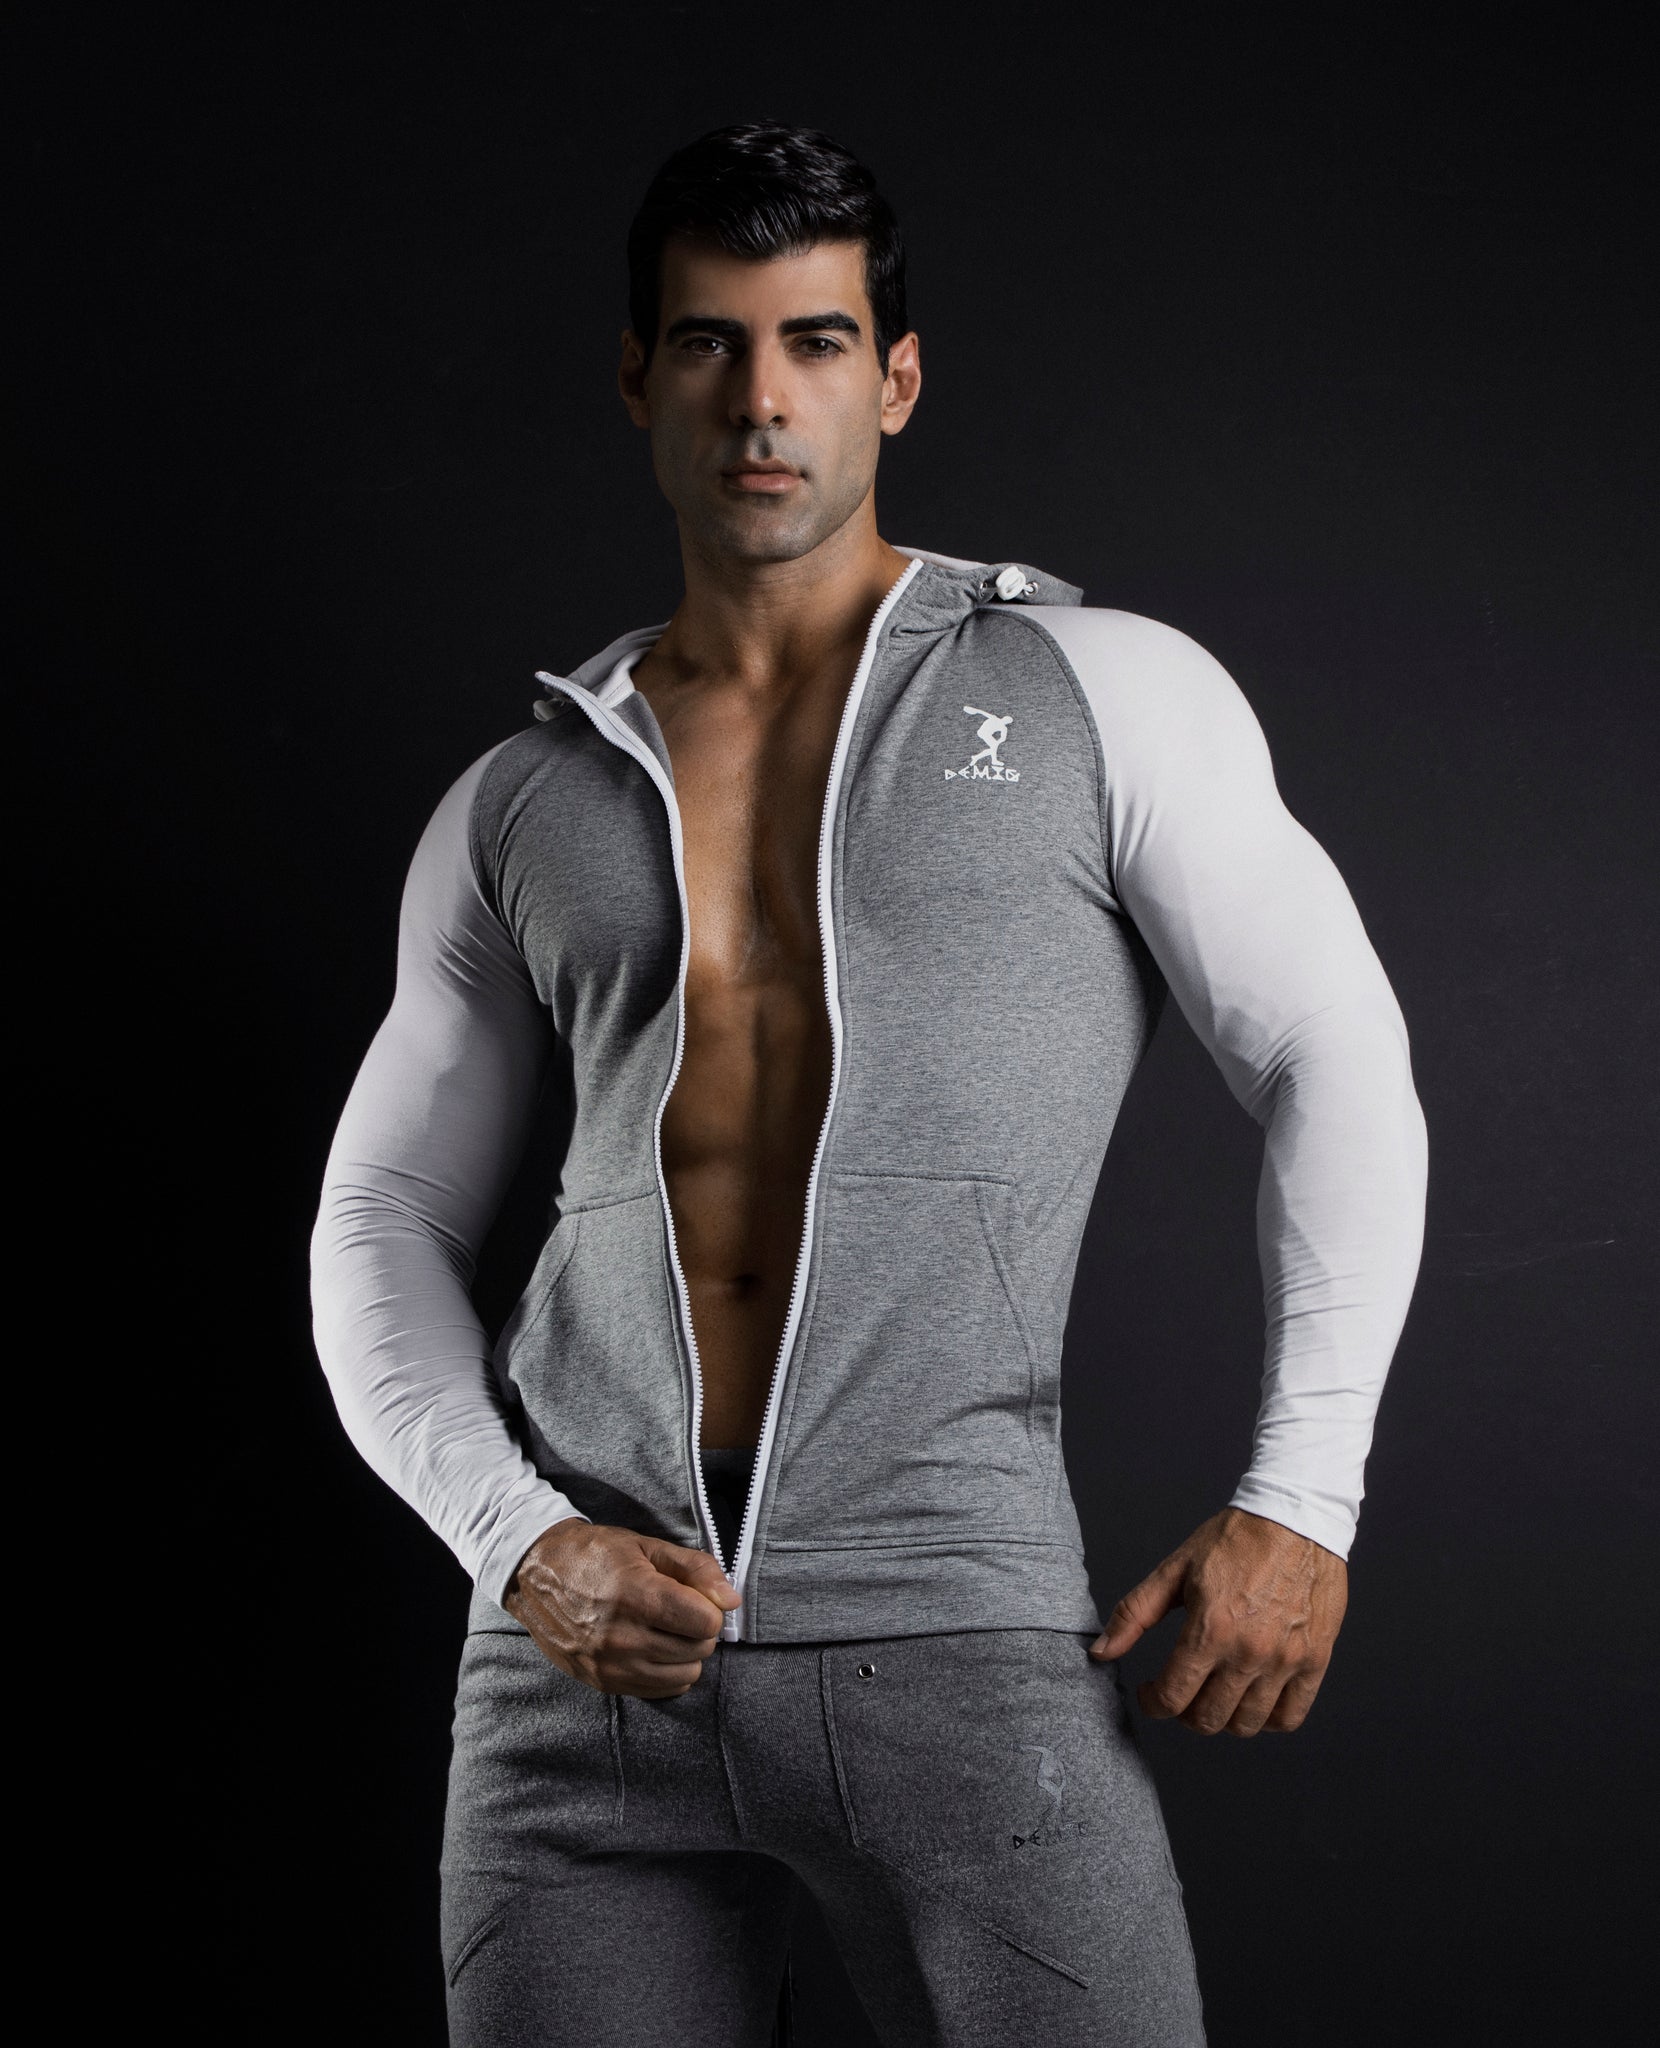 Mens Gray Zip Up Hoodie Slim Fit with Kanga Pockets Made with Organic Cotton and Microfiber - DEMIG